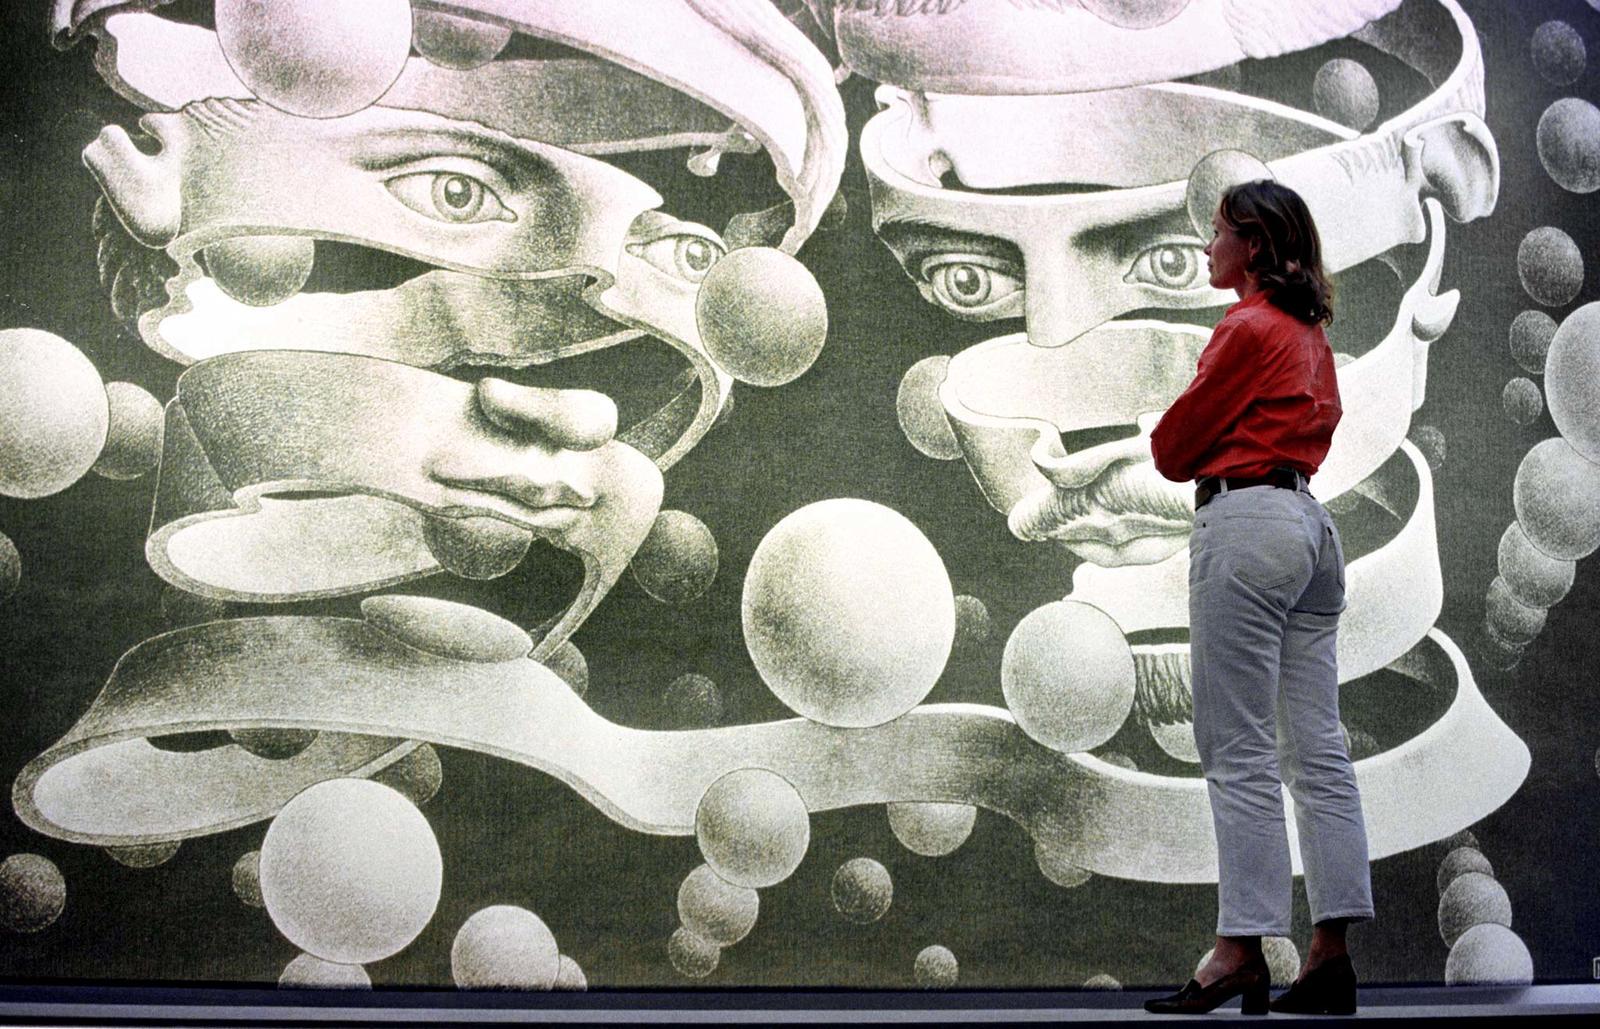 A WOMAN LOOKS AT A GIANT BACK-LIGHT BLOW UP OF M.C. ESCHER’S “BOND” AT THE ESCHER EXHIBITION IN …